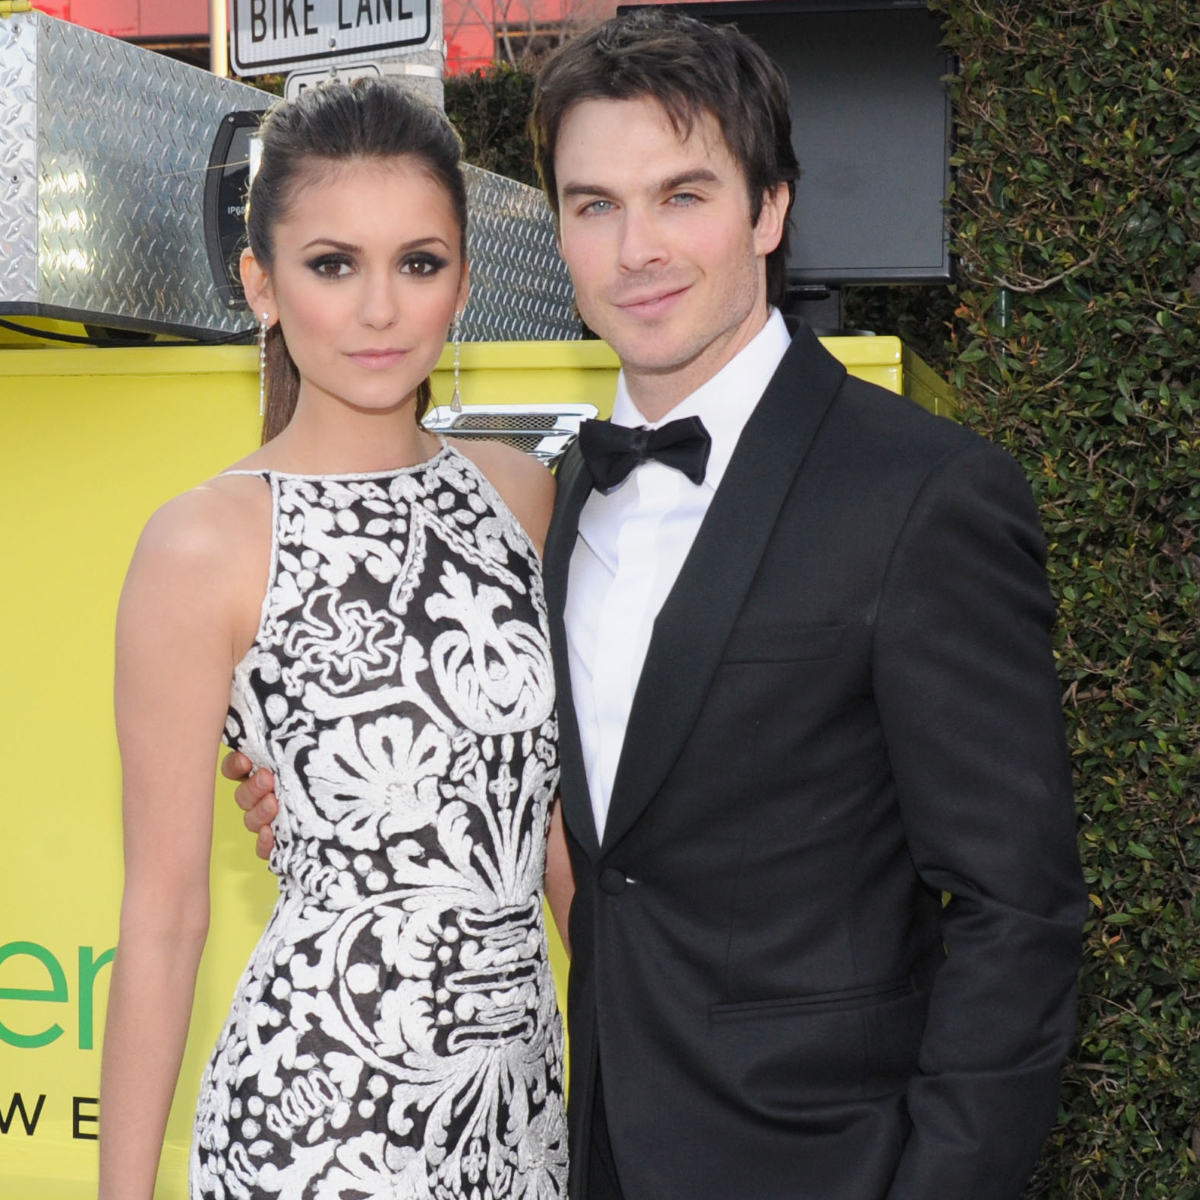 When The Vampire Diaries stars Nina Dobrev and Ian Somerhalder shared cryptic posts after their breakup